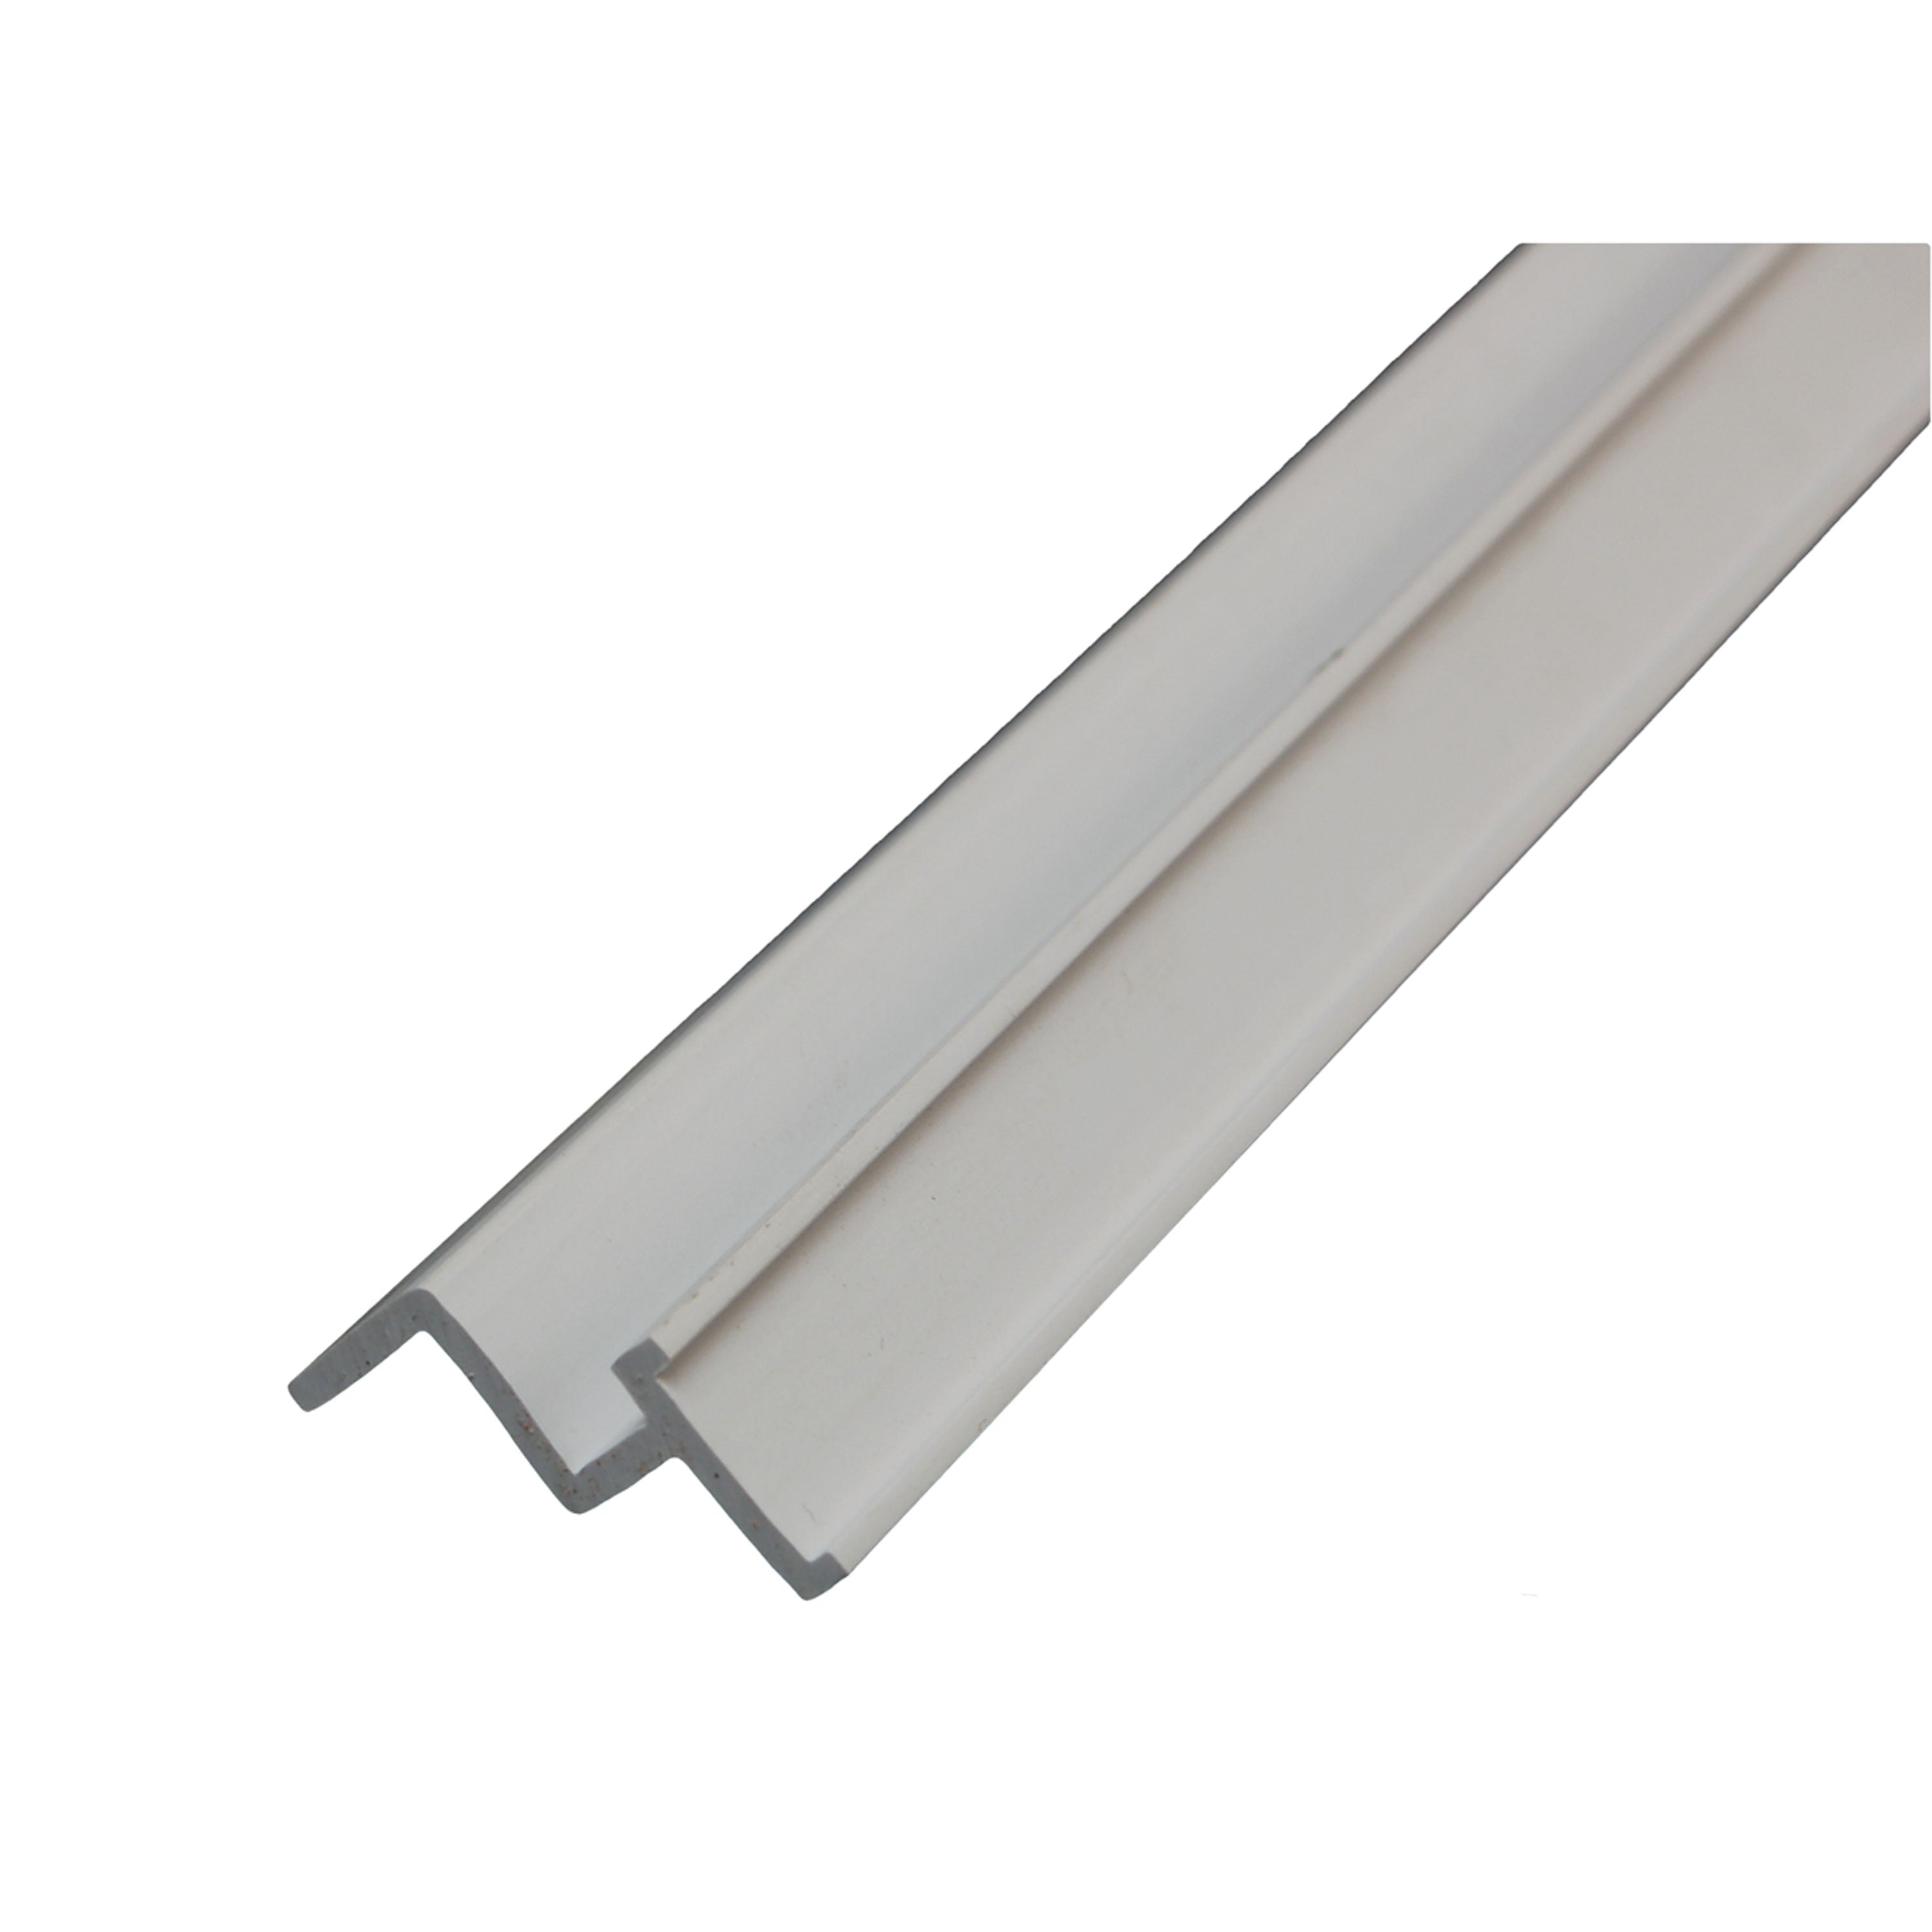 RV Designer A601 Ceiling Track for Snap Tape - 96"